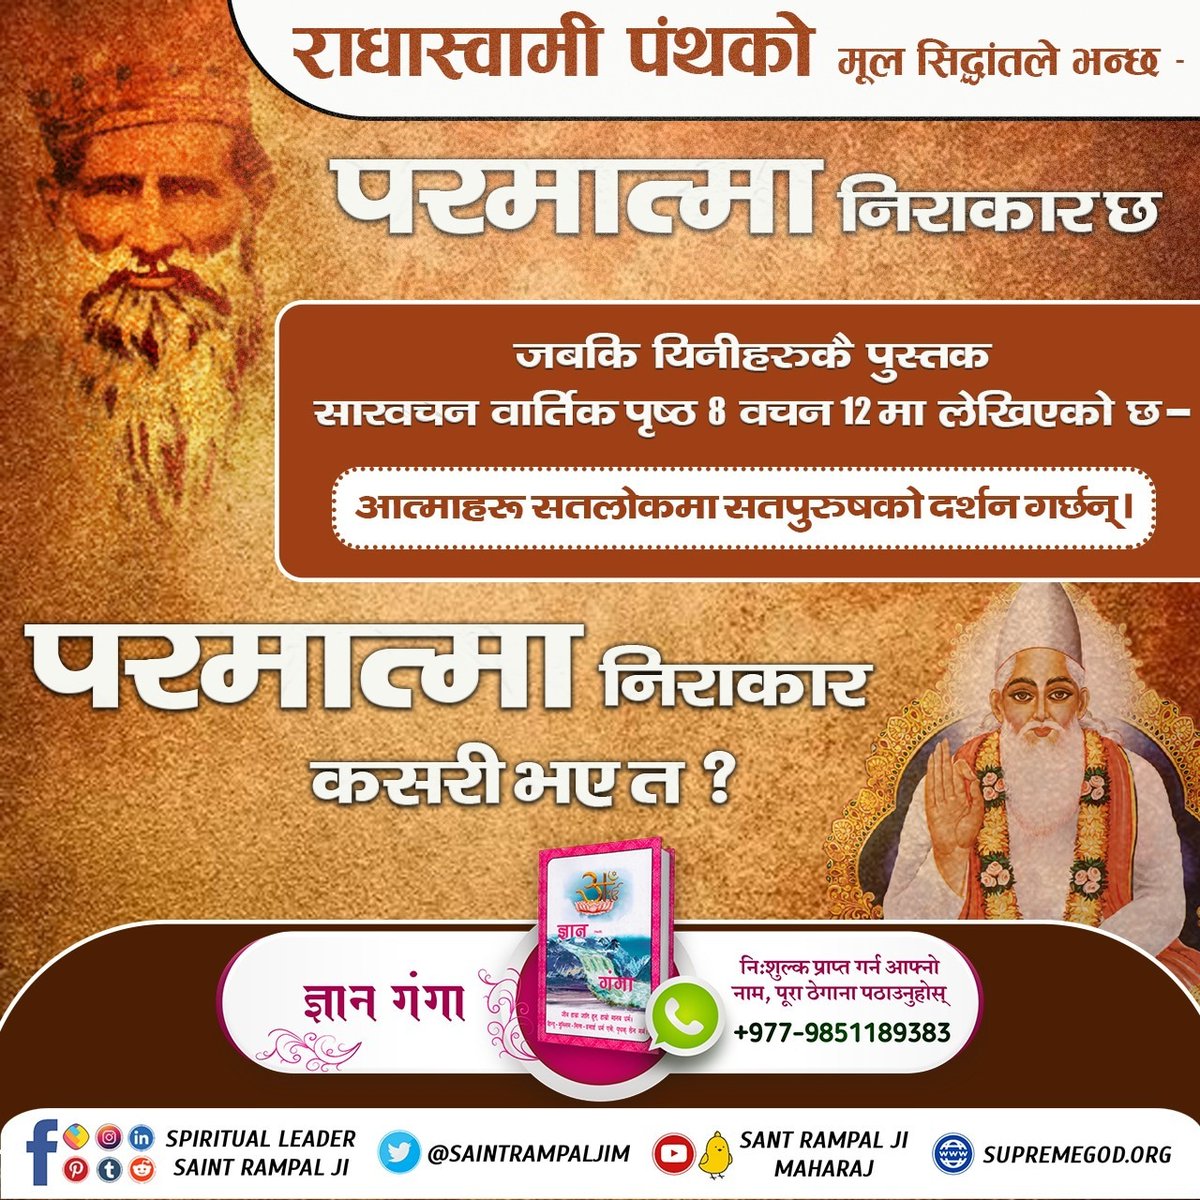 #राधास्वामी_पन्थको_सत्यता Proponents of the Radha Swami cult say that the Supreme Personality of Godhead is formless and His light can be seen. But it is clearly written in the Vedas that God is Narakara, (male form).